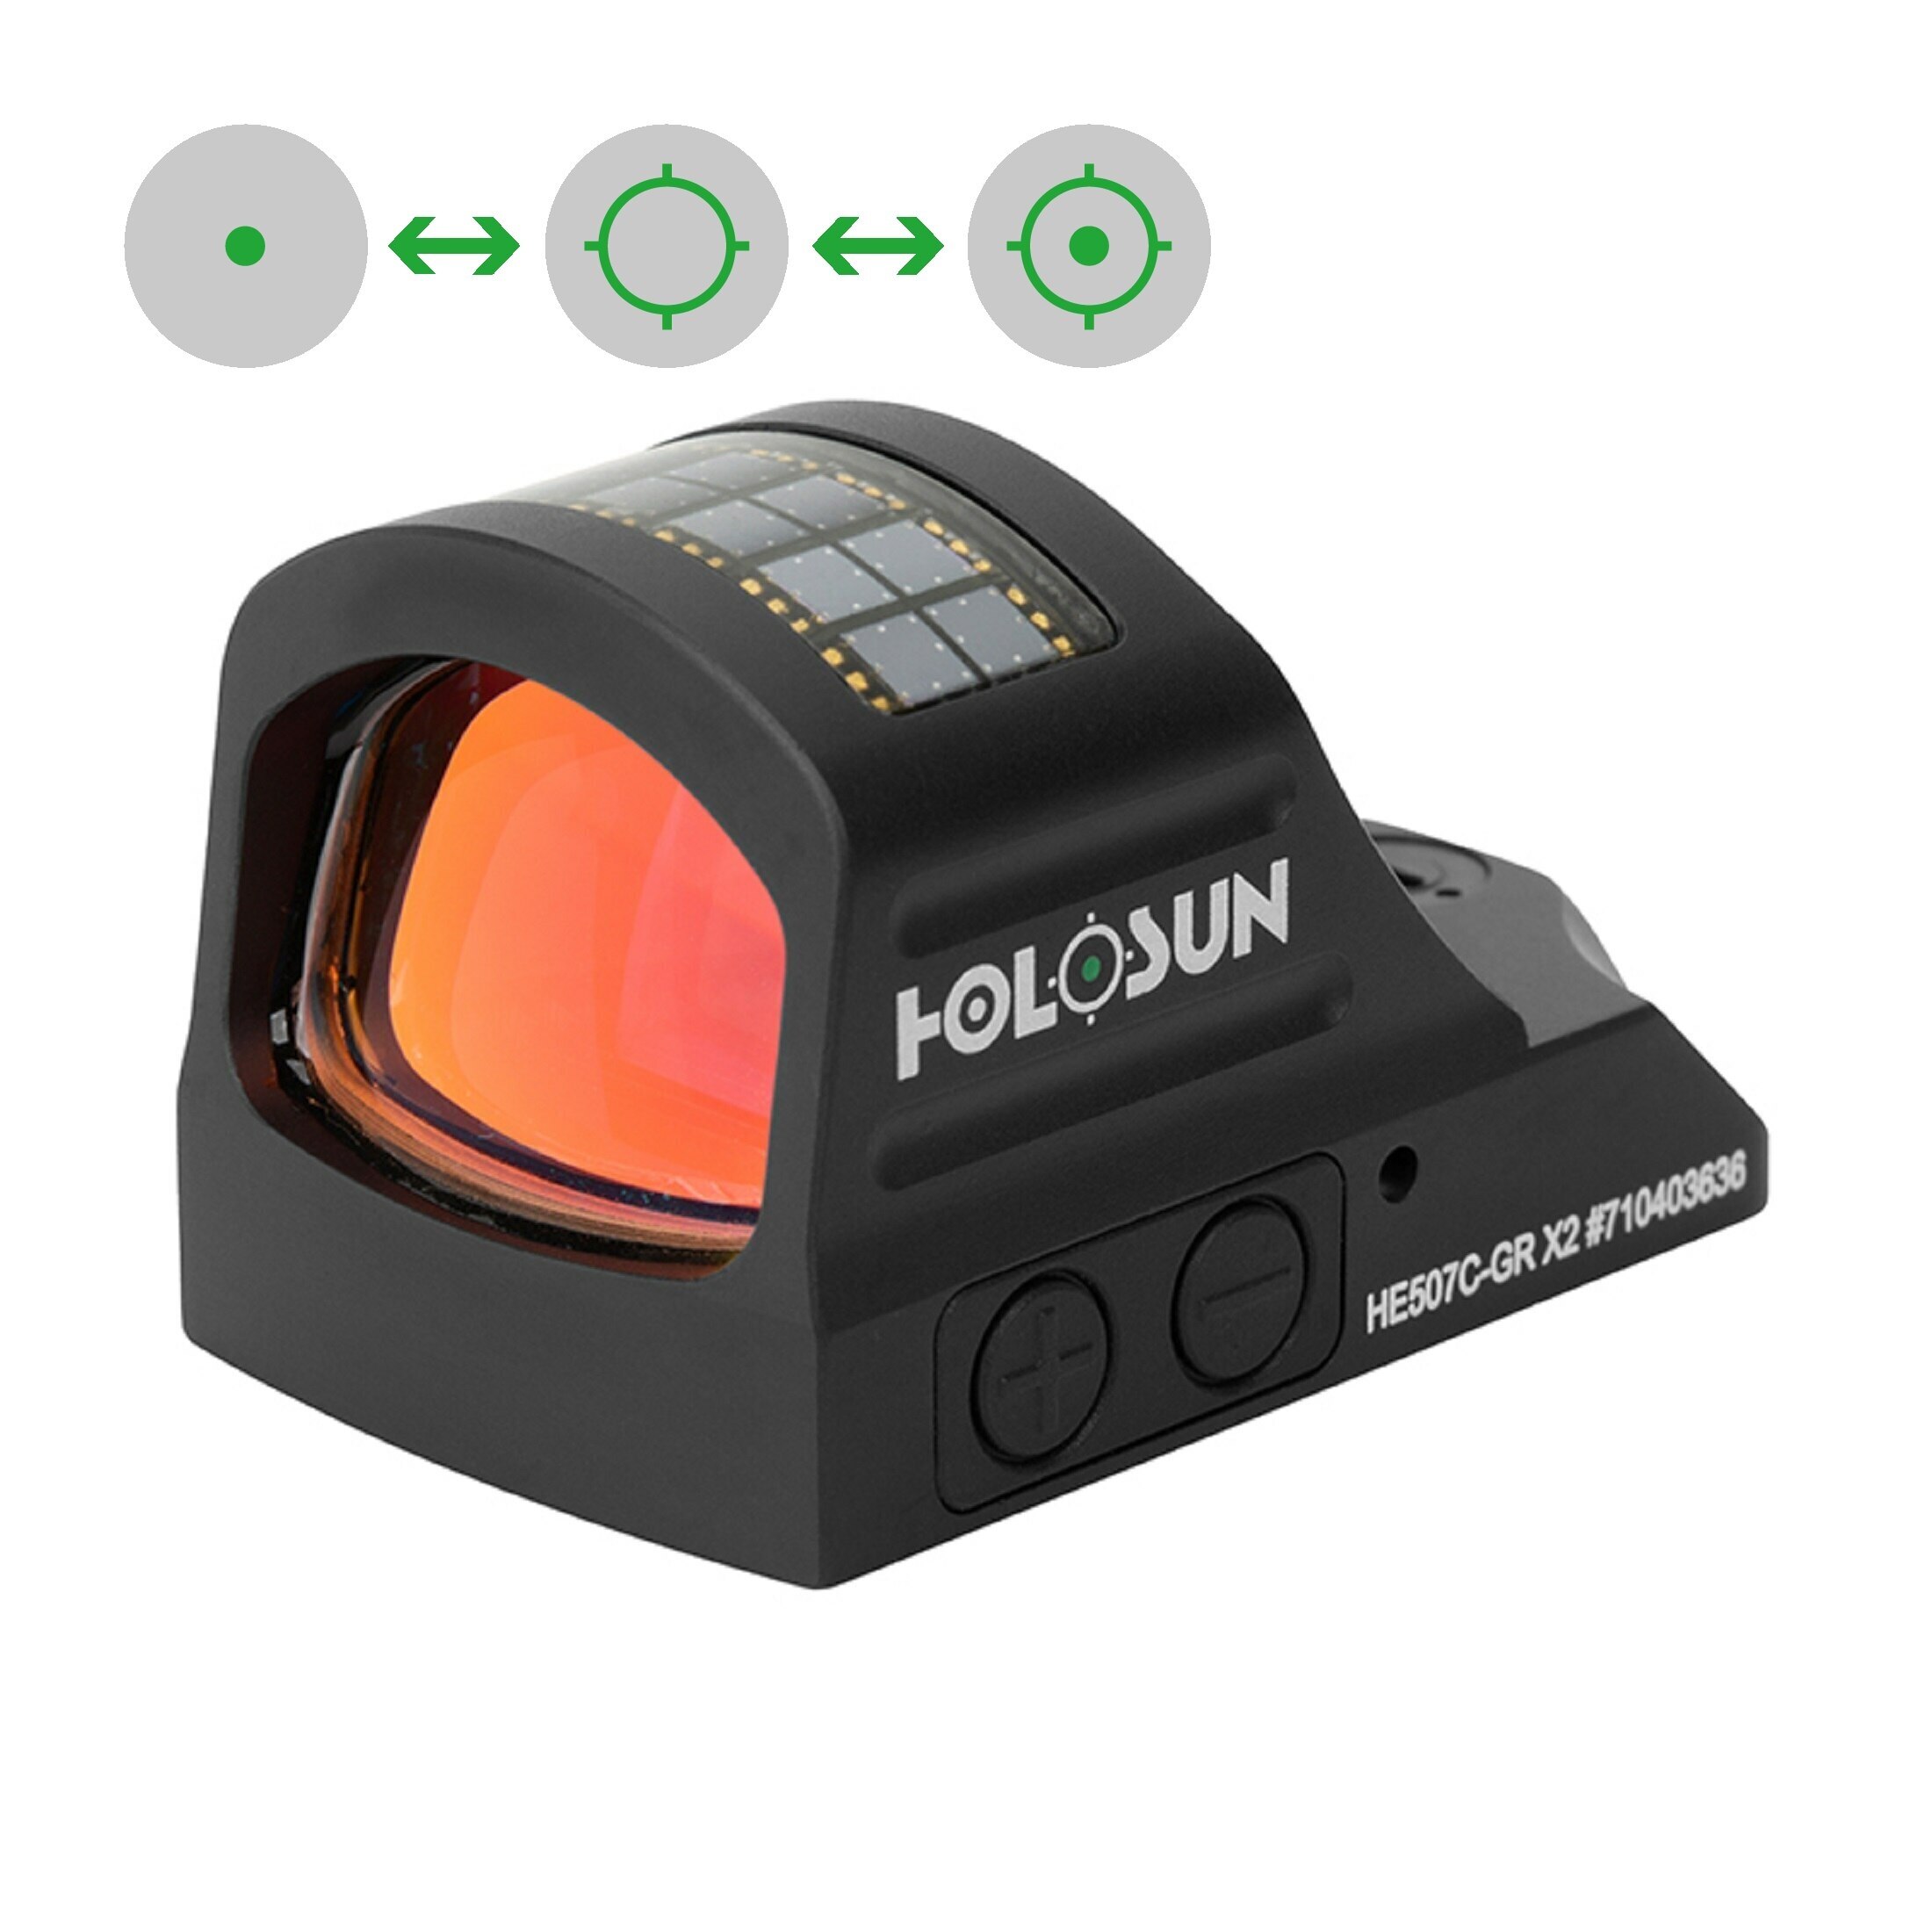 Holosun Open Reflex Dot Sight HE507C-GR-X2 with switchable reticle, green dot sight, hunting, airso…